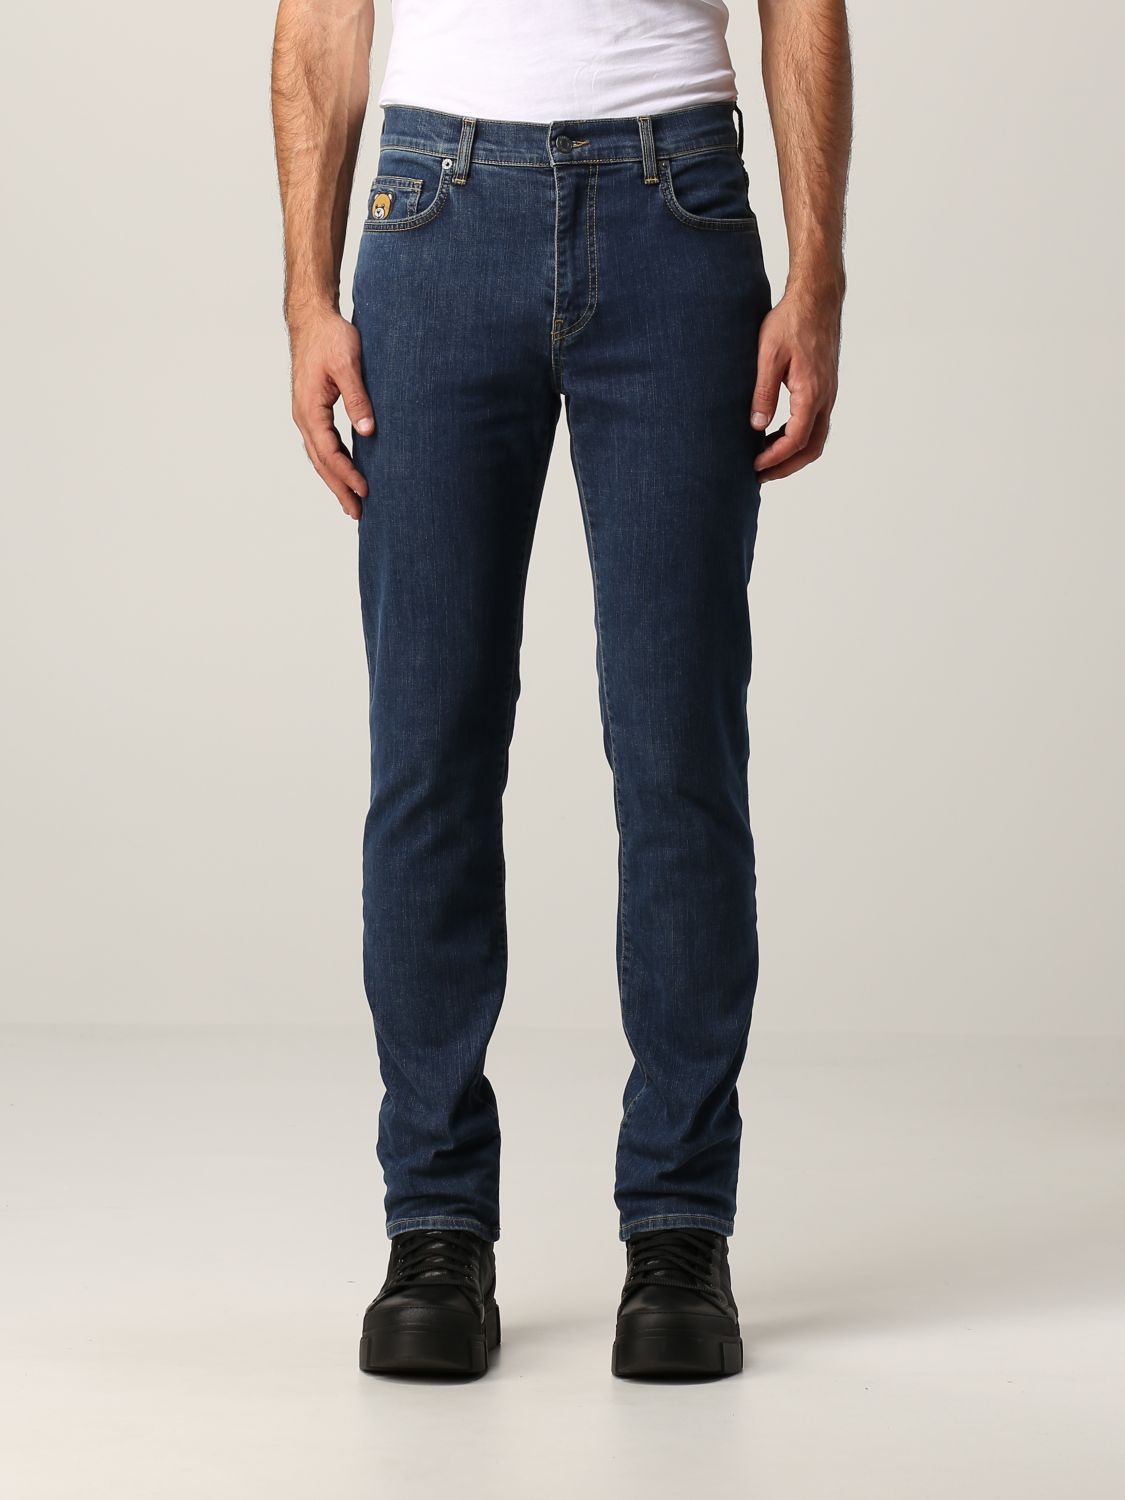 Jeans Moschino Couture: Moschino Couture 5-pocket jeans denim 1